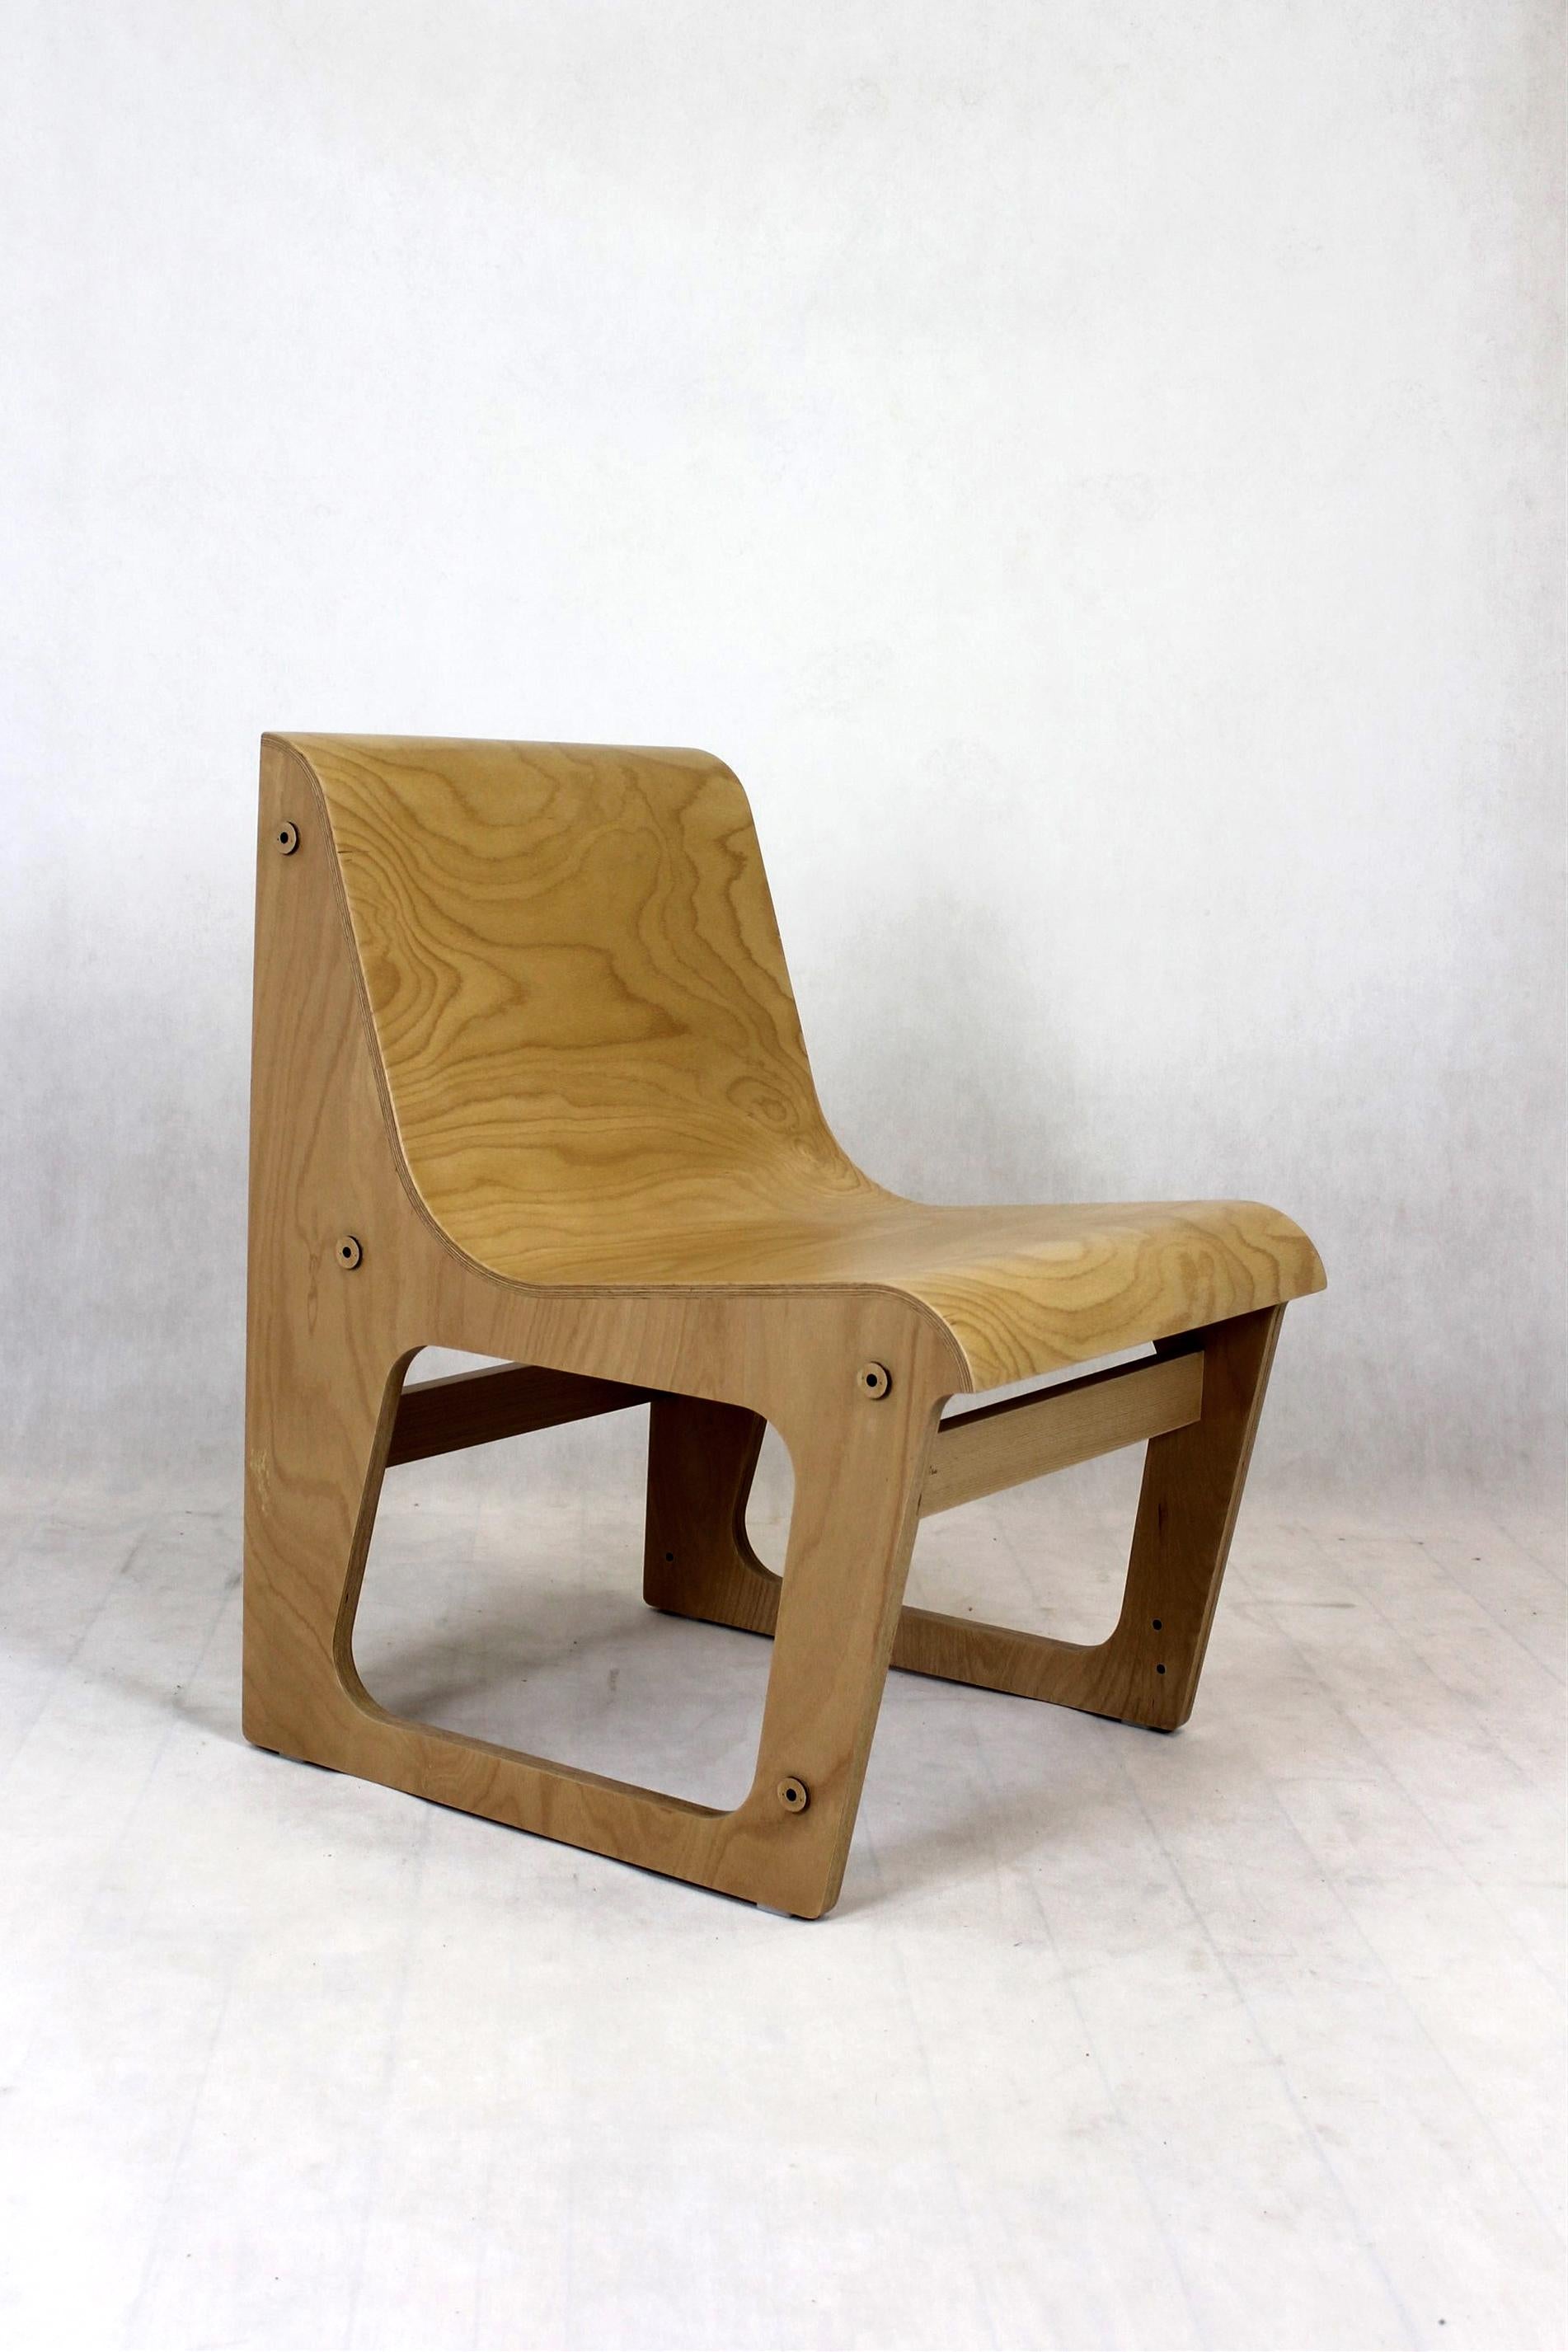 Beech Plywood Symposio Bench / Chairs by René Šulc for Ton, 2010s 3